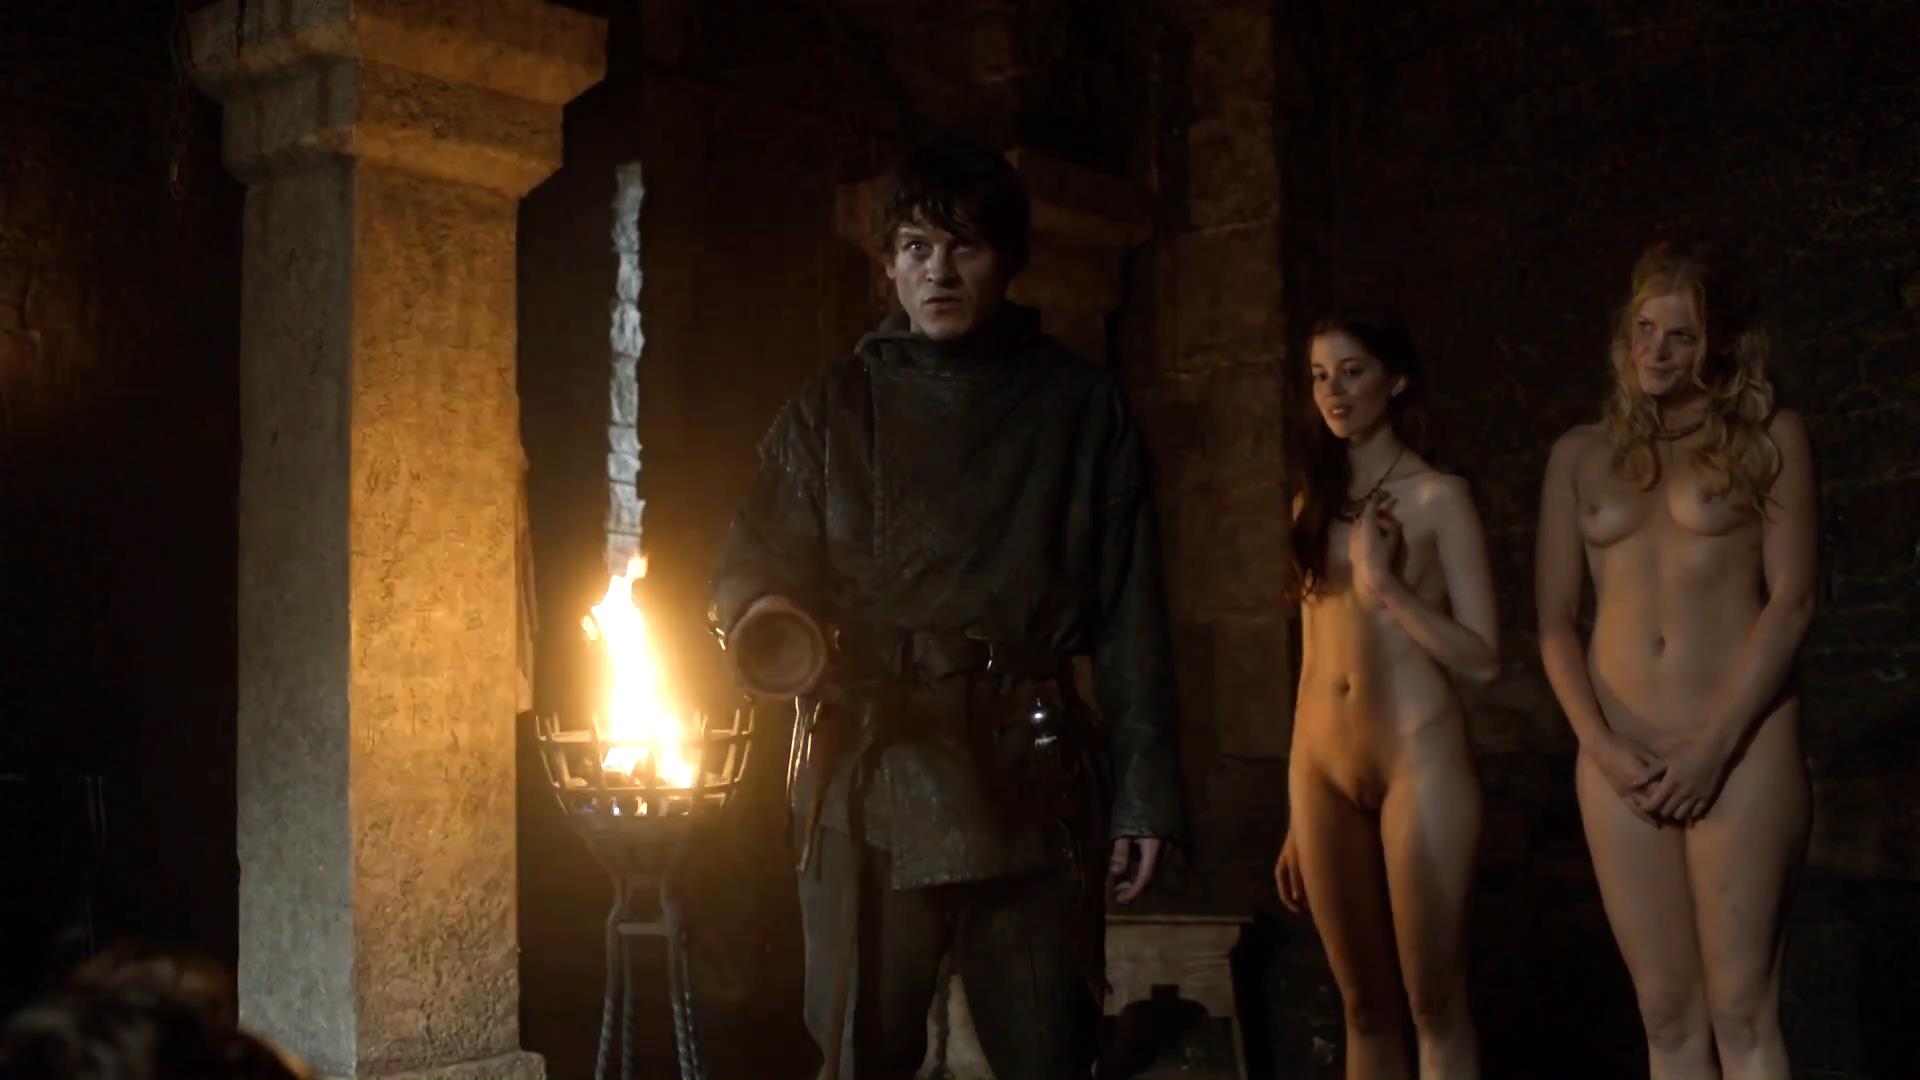 Charlotte hope game of thrones nude